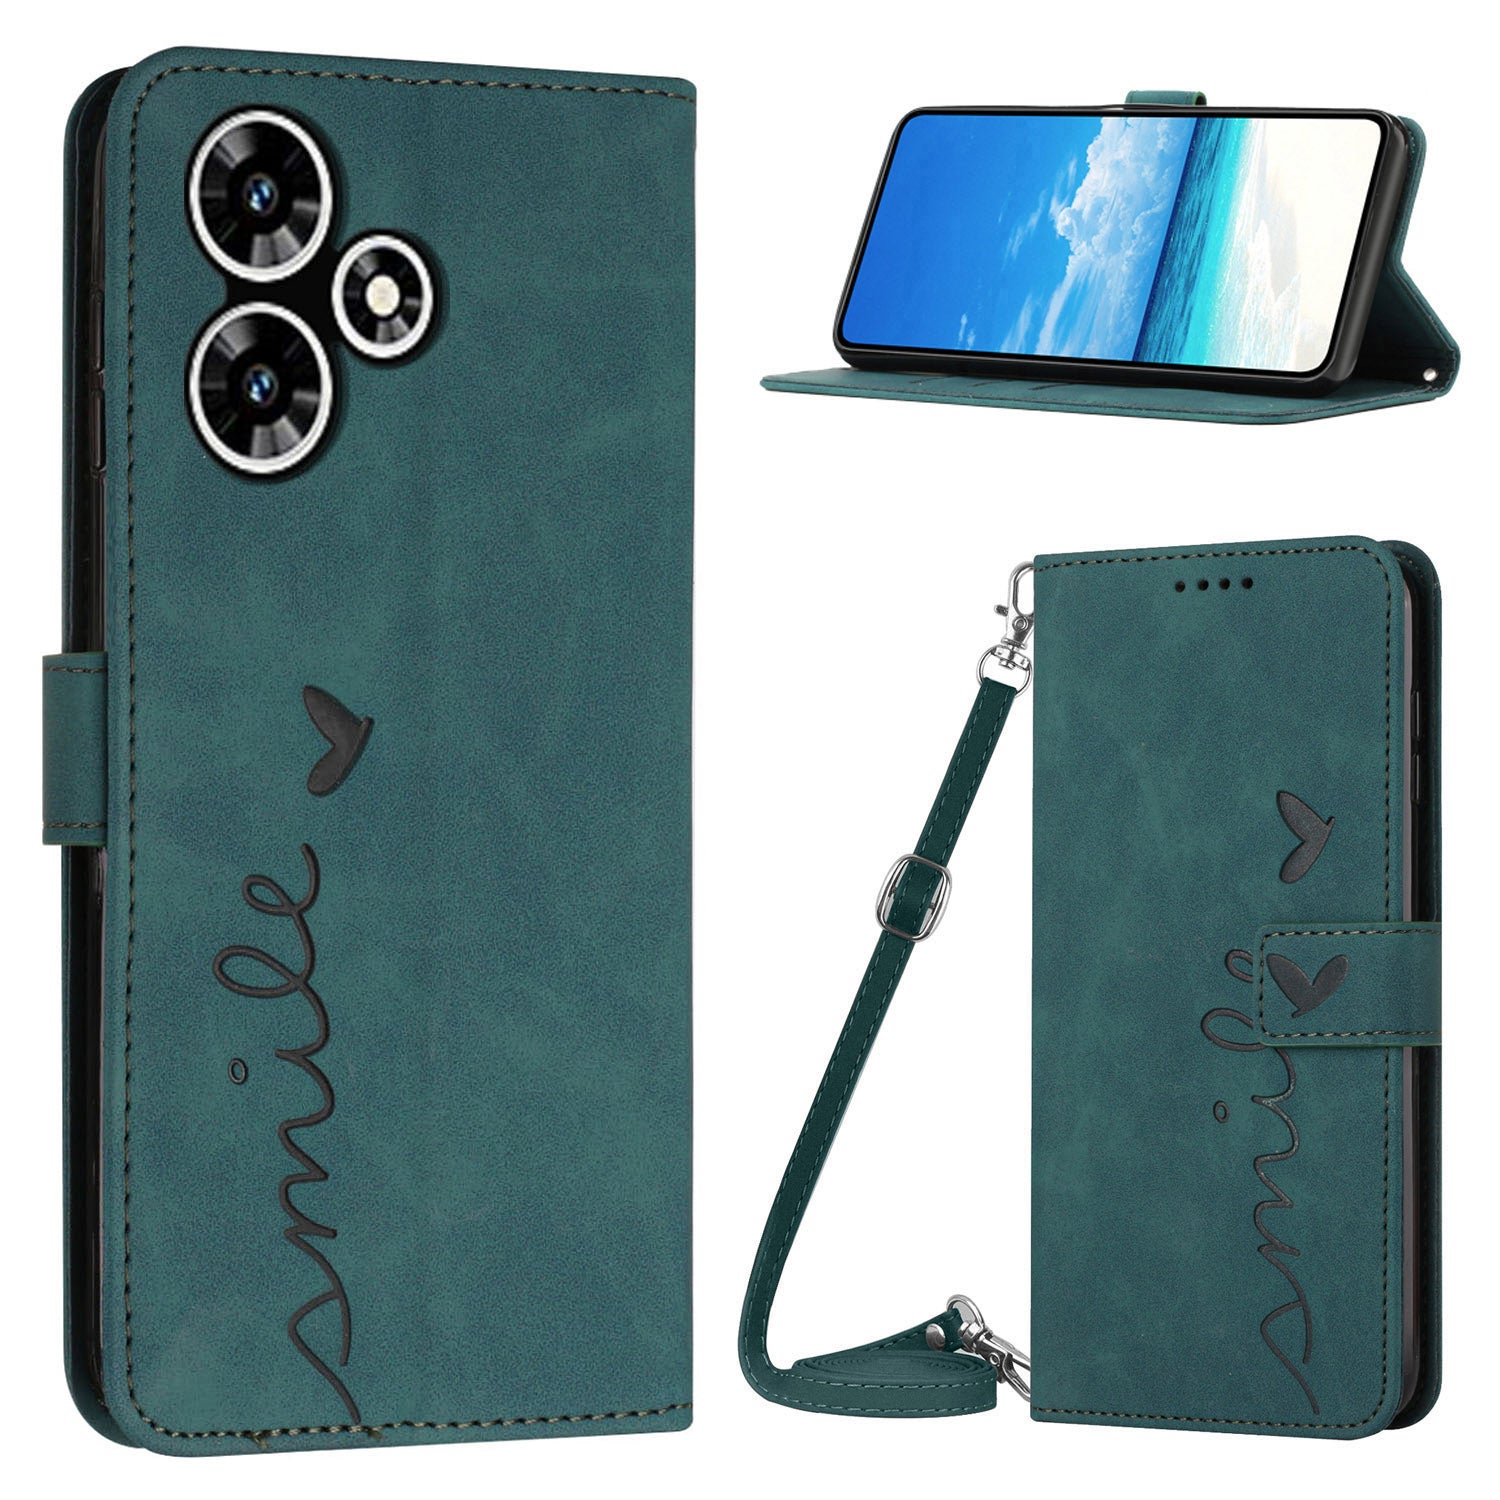 Wallet PU Leather Case for Infinix Hot 30 , Heart Shape Phone Stand Cover with Shoulder Strap - Green